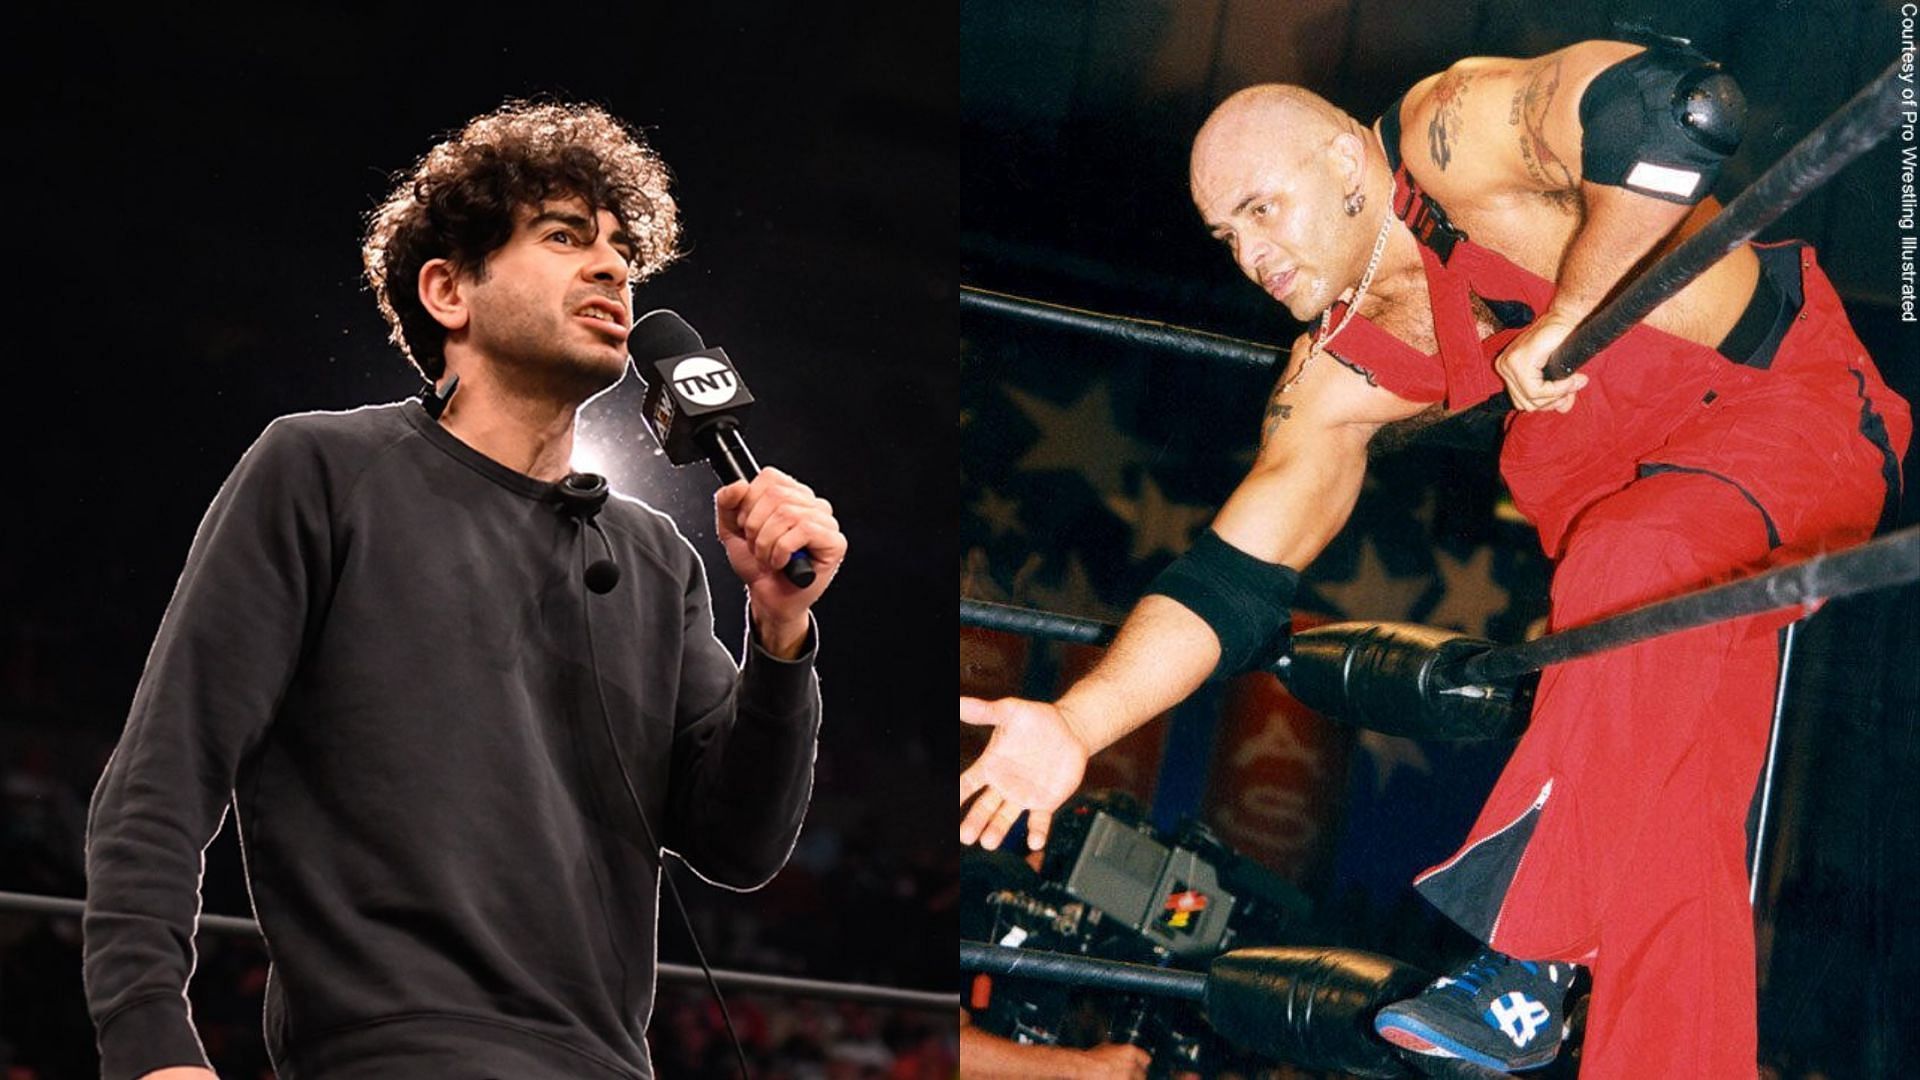 Konnan is a former WCW superstar and Tony Khan is the president of AEW [Photo courtesy of WWE